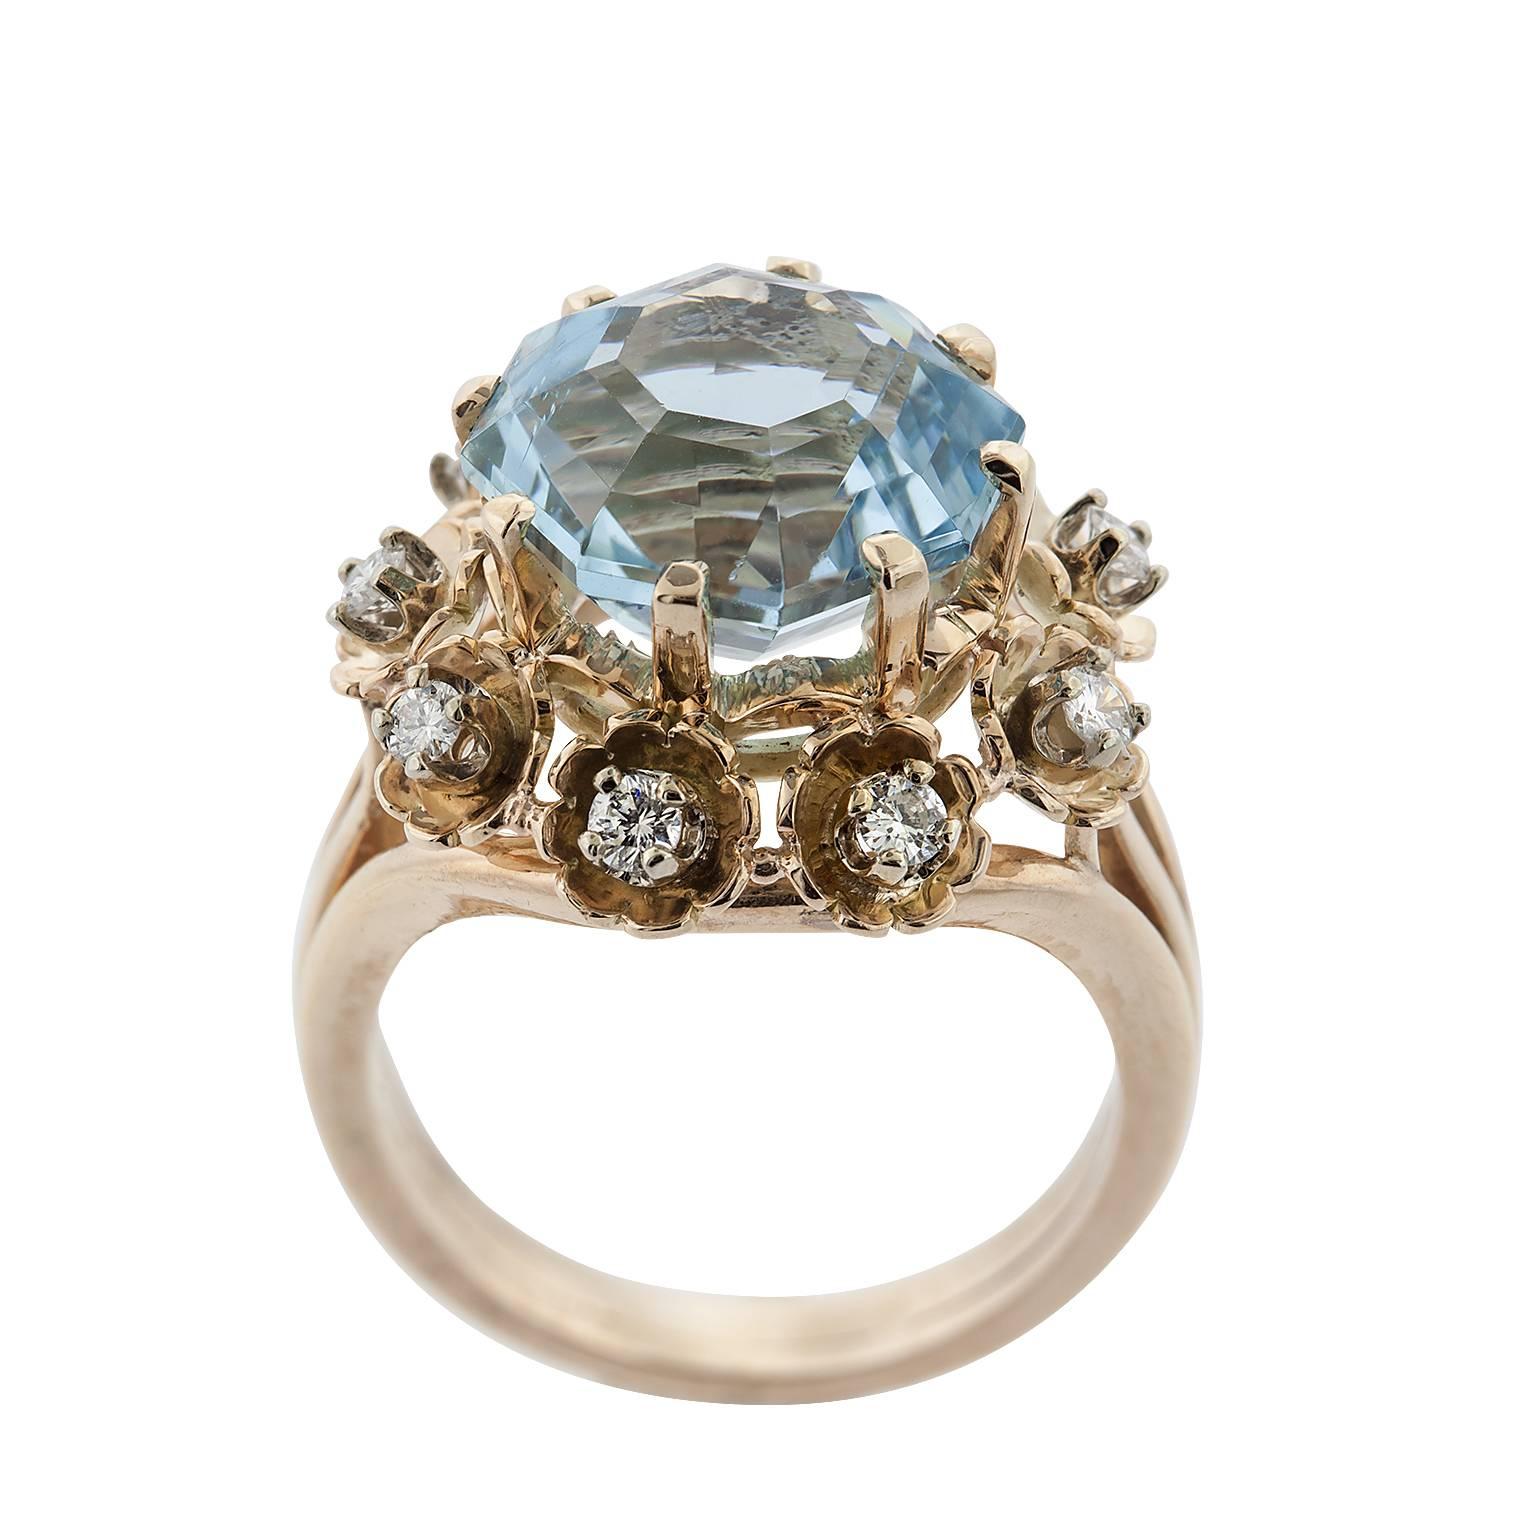 6.61 carat octagonal cut aquamarine and diamond 14 karat rose gold ring.  The aquamarine is set with eight prongs atop a single row of spaced round brilliant diamonds, set in floral designed gold.  The diamonds have a total weight of 0.54 carats,